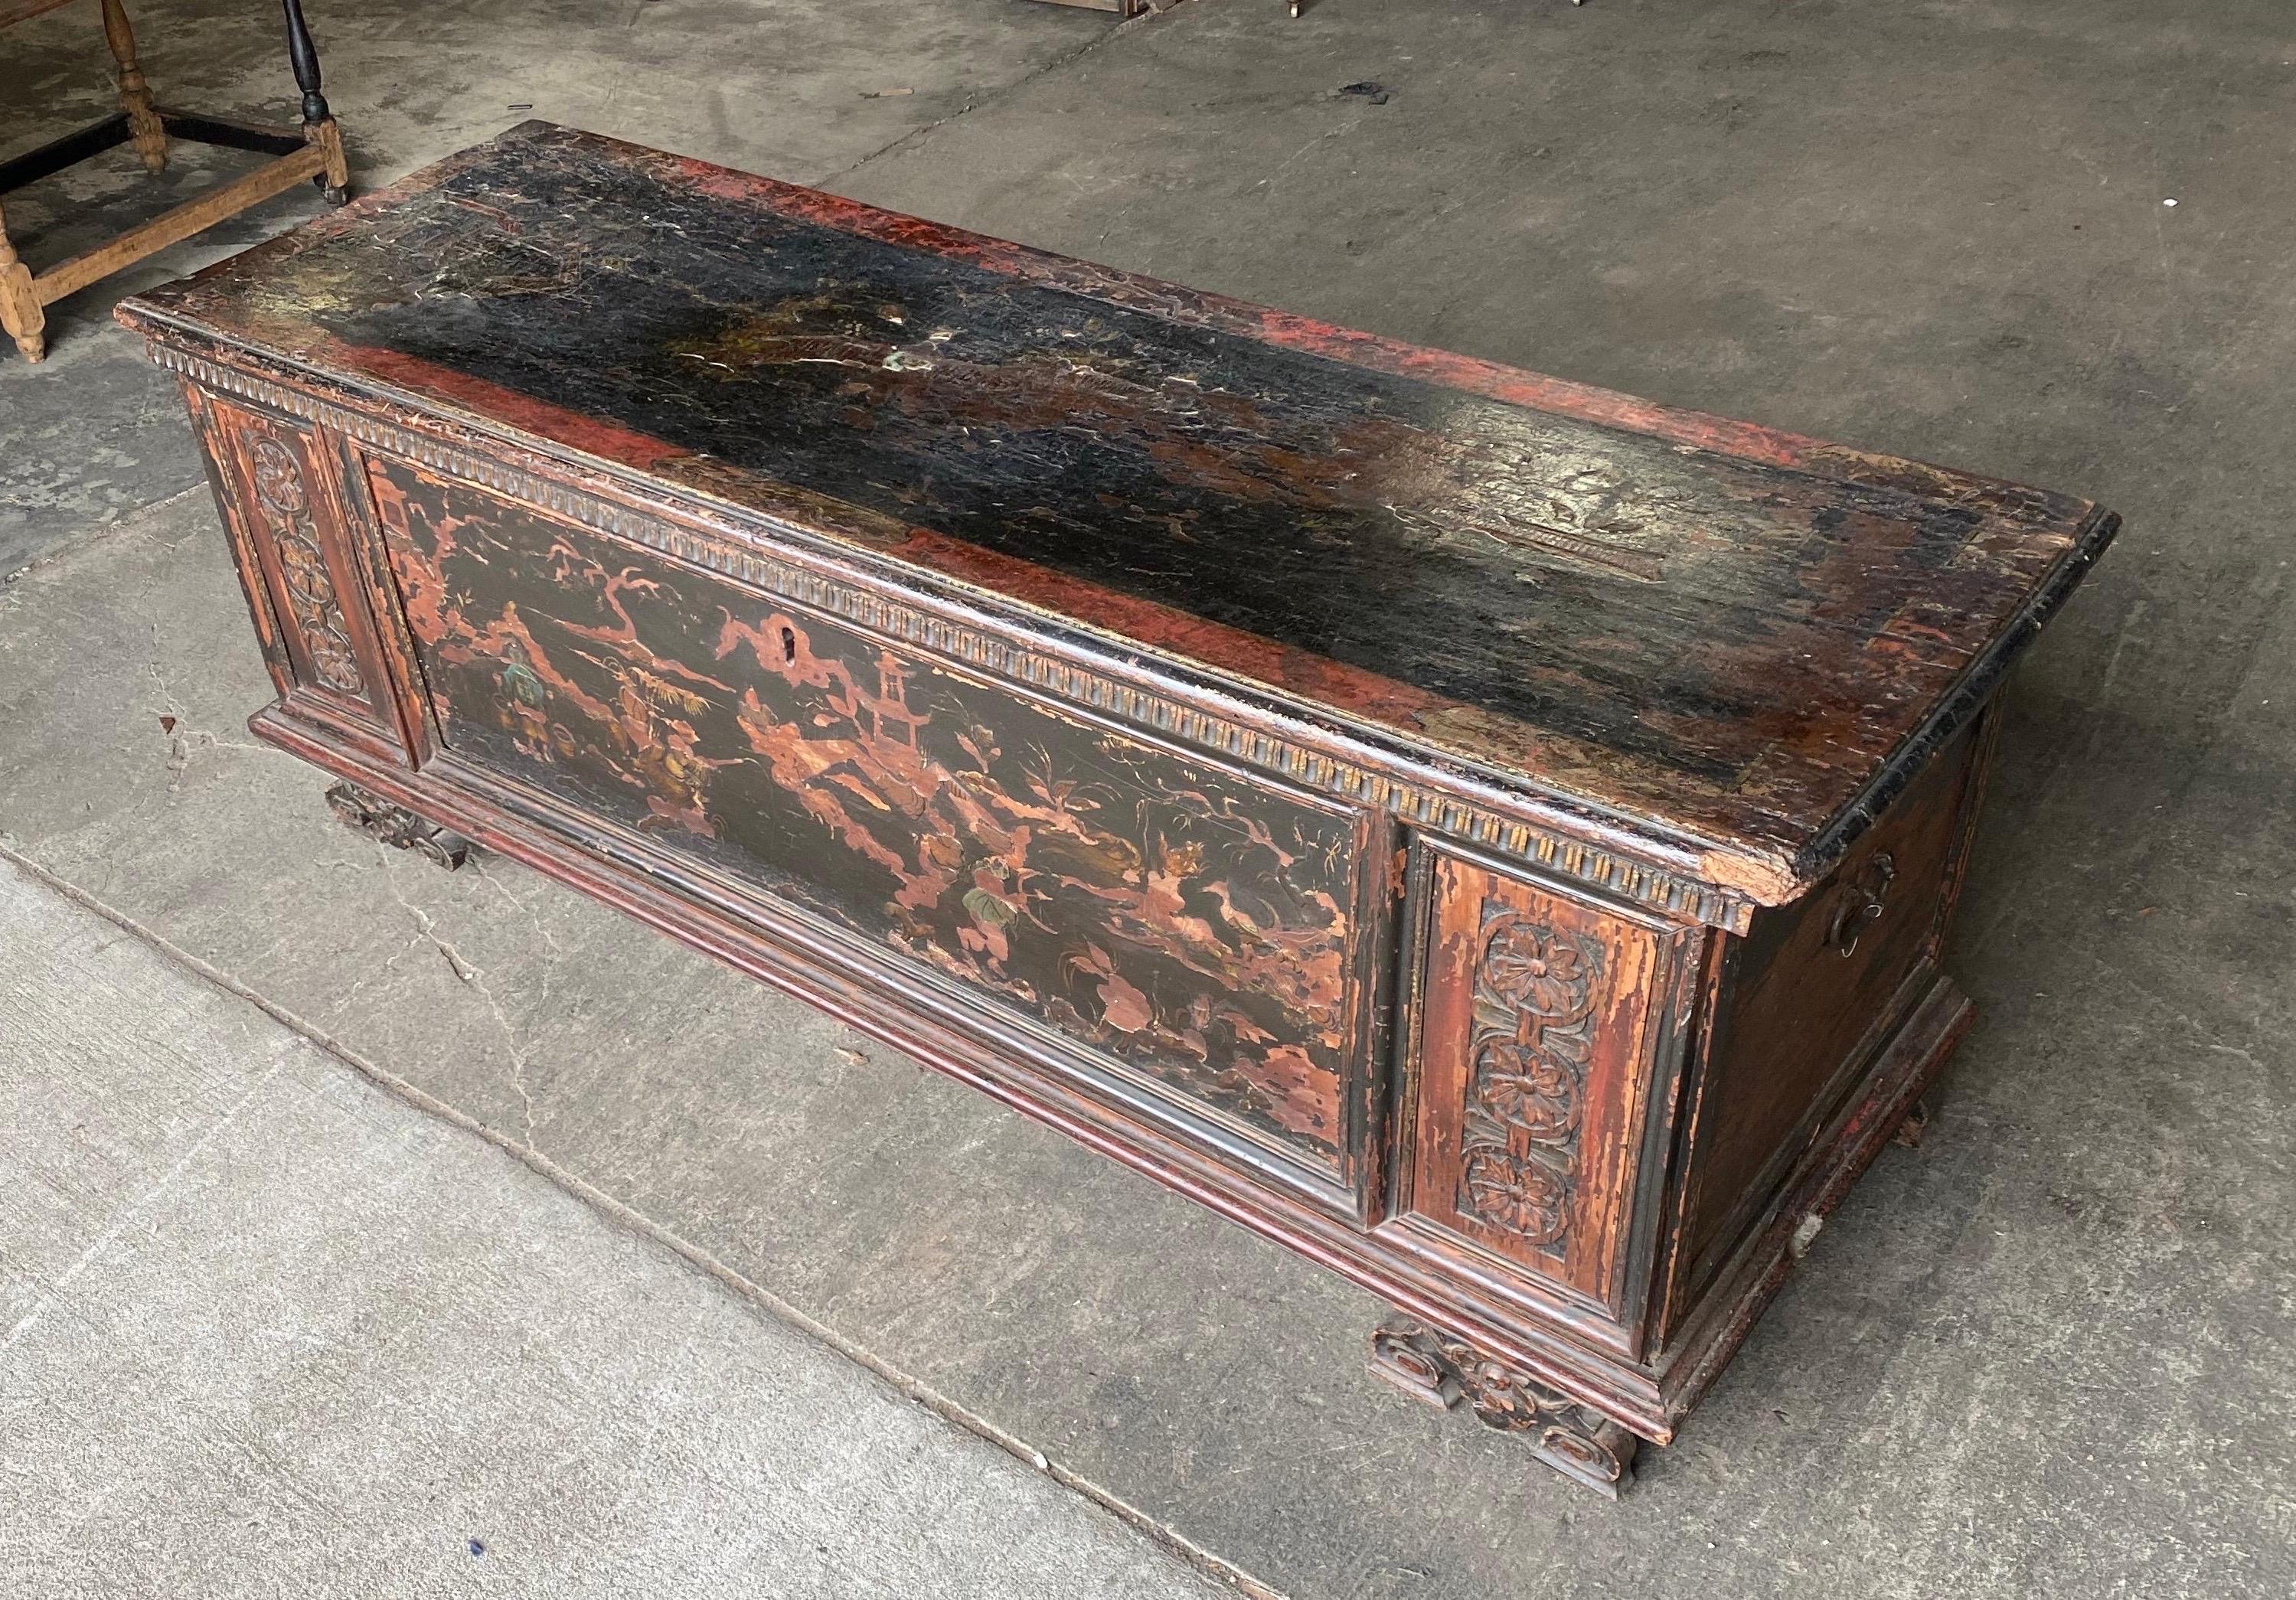 Late 17th-early 18th century Italian cassone with 19th century chinoiserie decoration. Incredible size and scale. Would make an excellent coffee table in a large living room, or would be great at the foot of a king size bed.